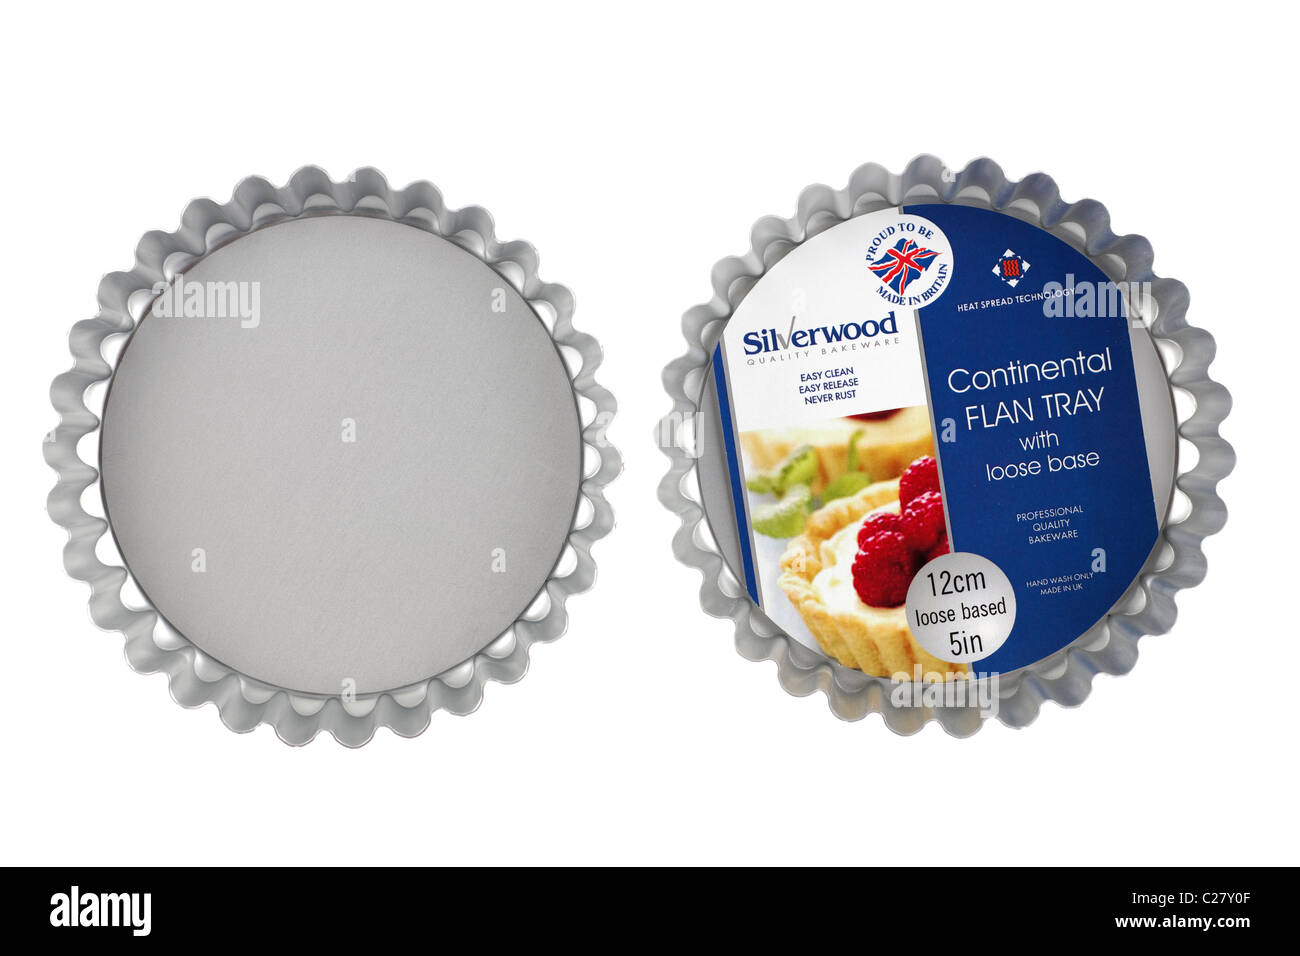 two 12cm loose based continental flan tray Stock Photo